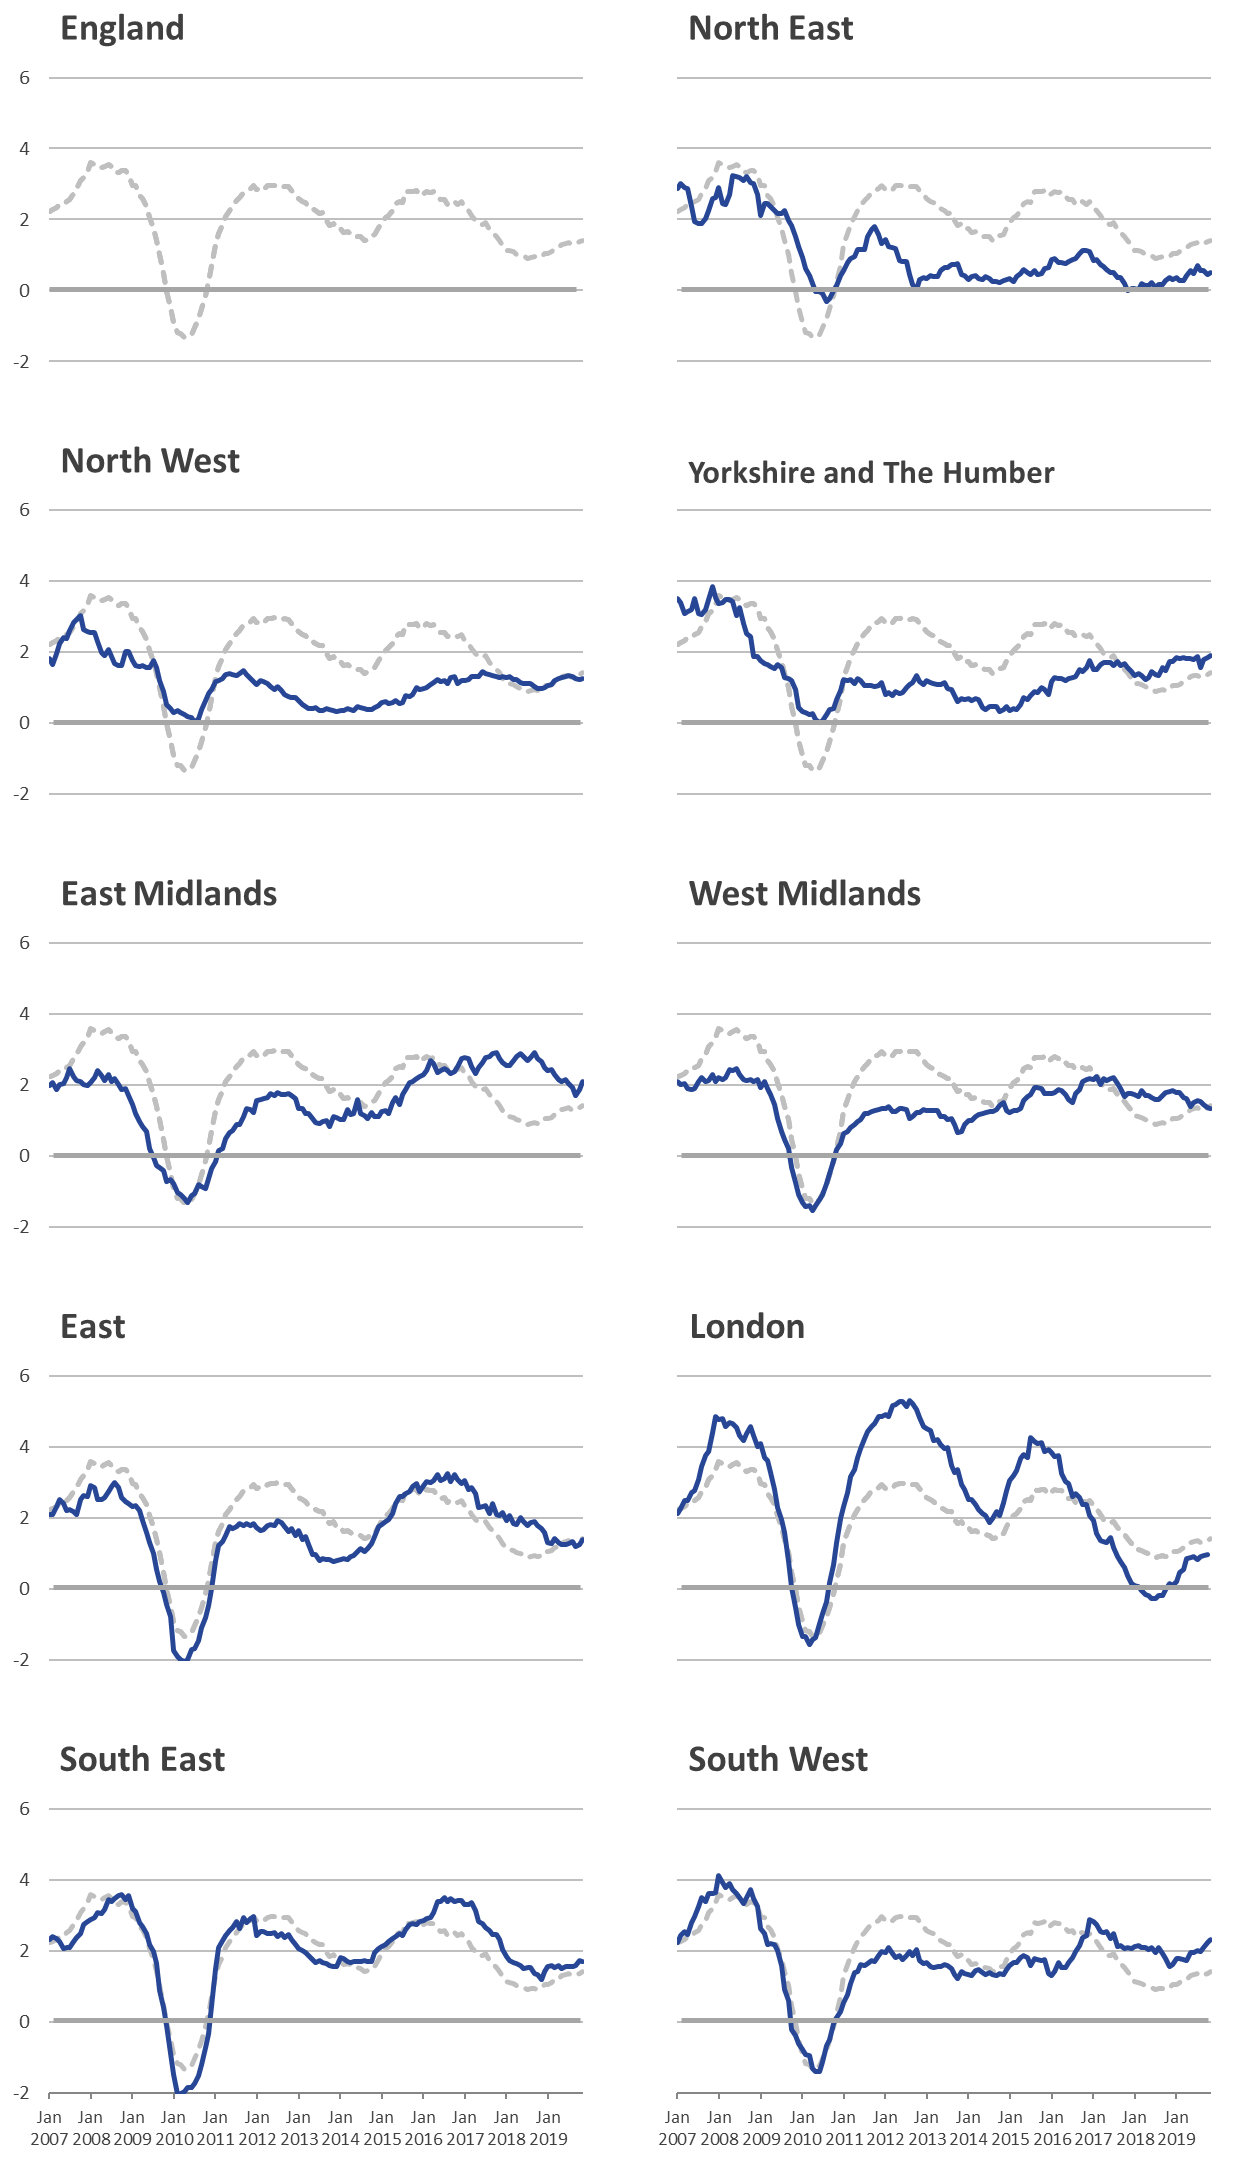 London rental prices experienced greater increases and falls than the other regions.